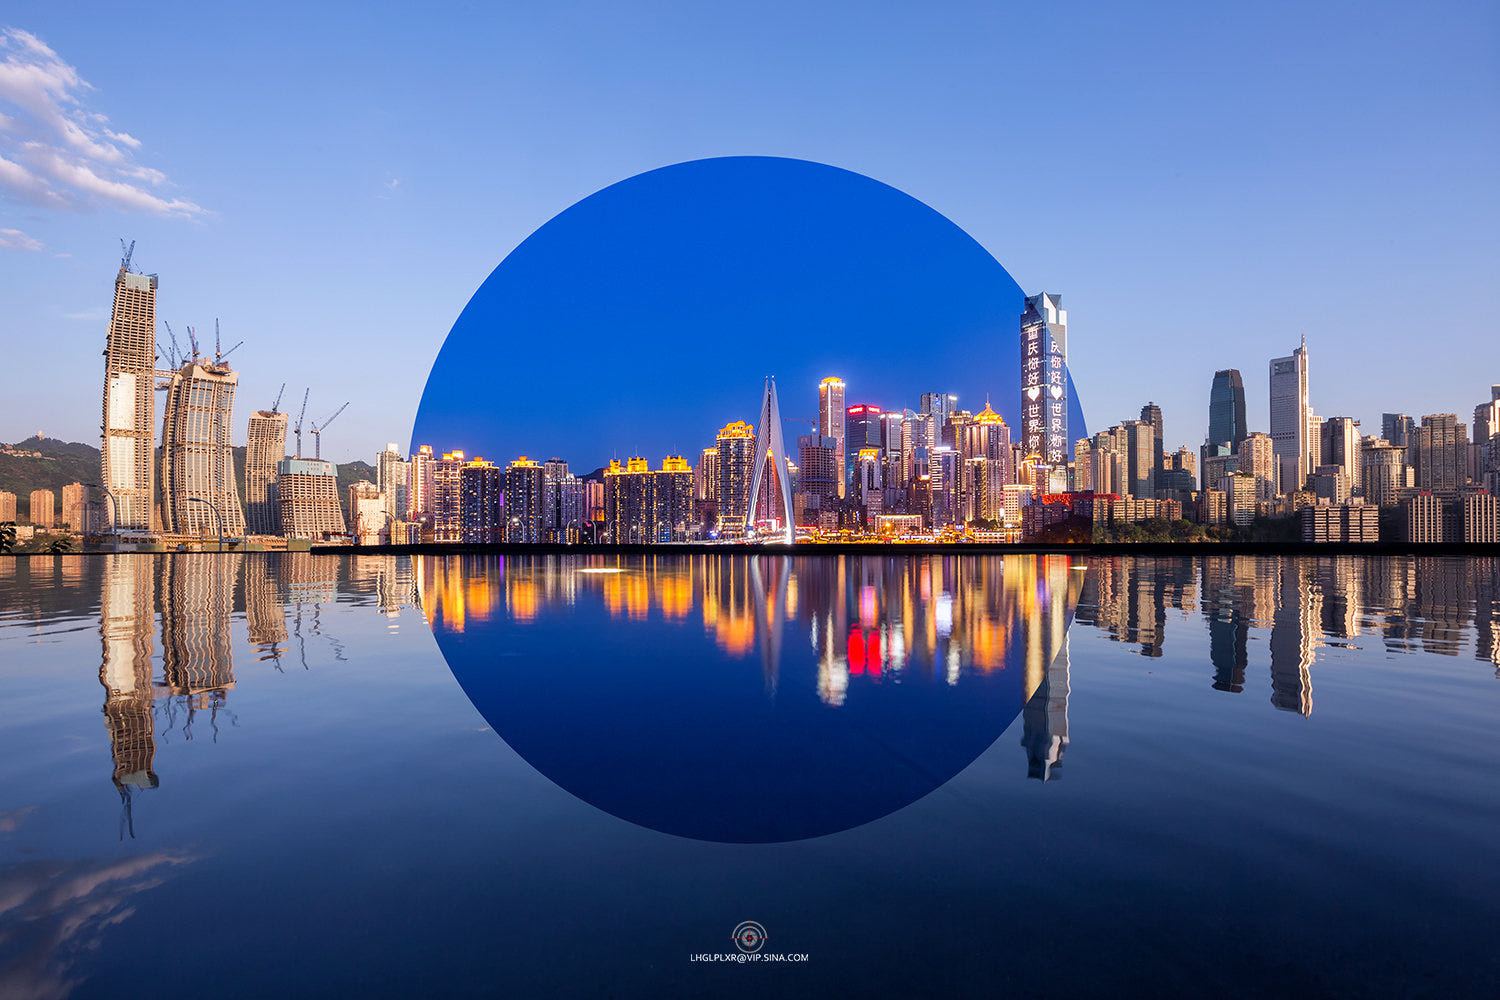 Excellent Cityscape Wallpaper 4k by Chinese Photographer